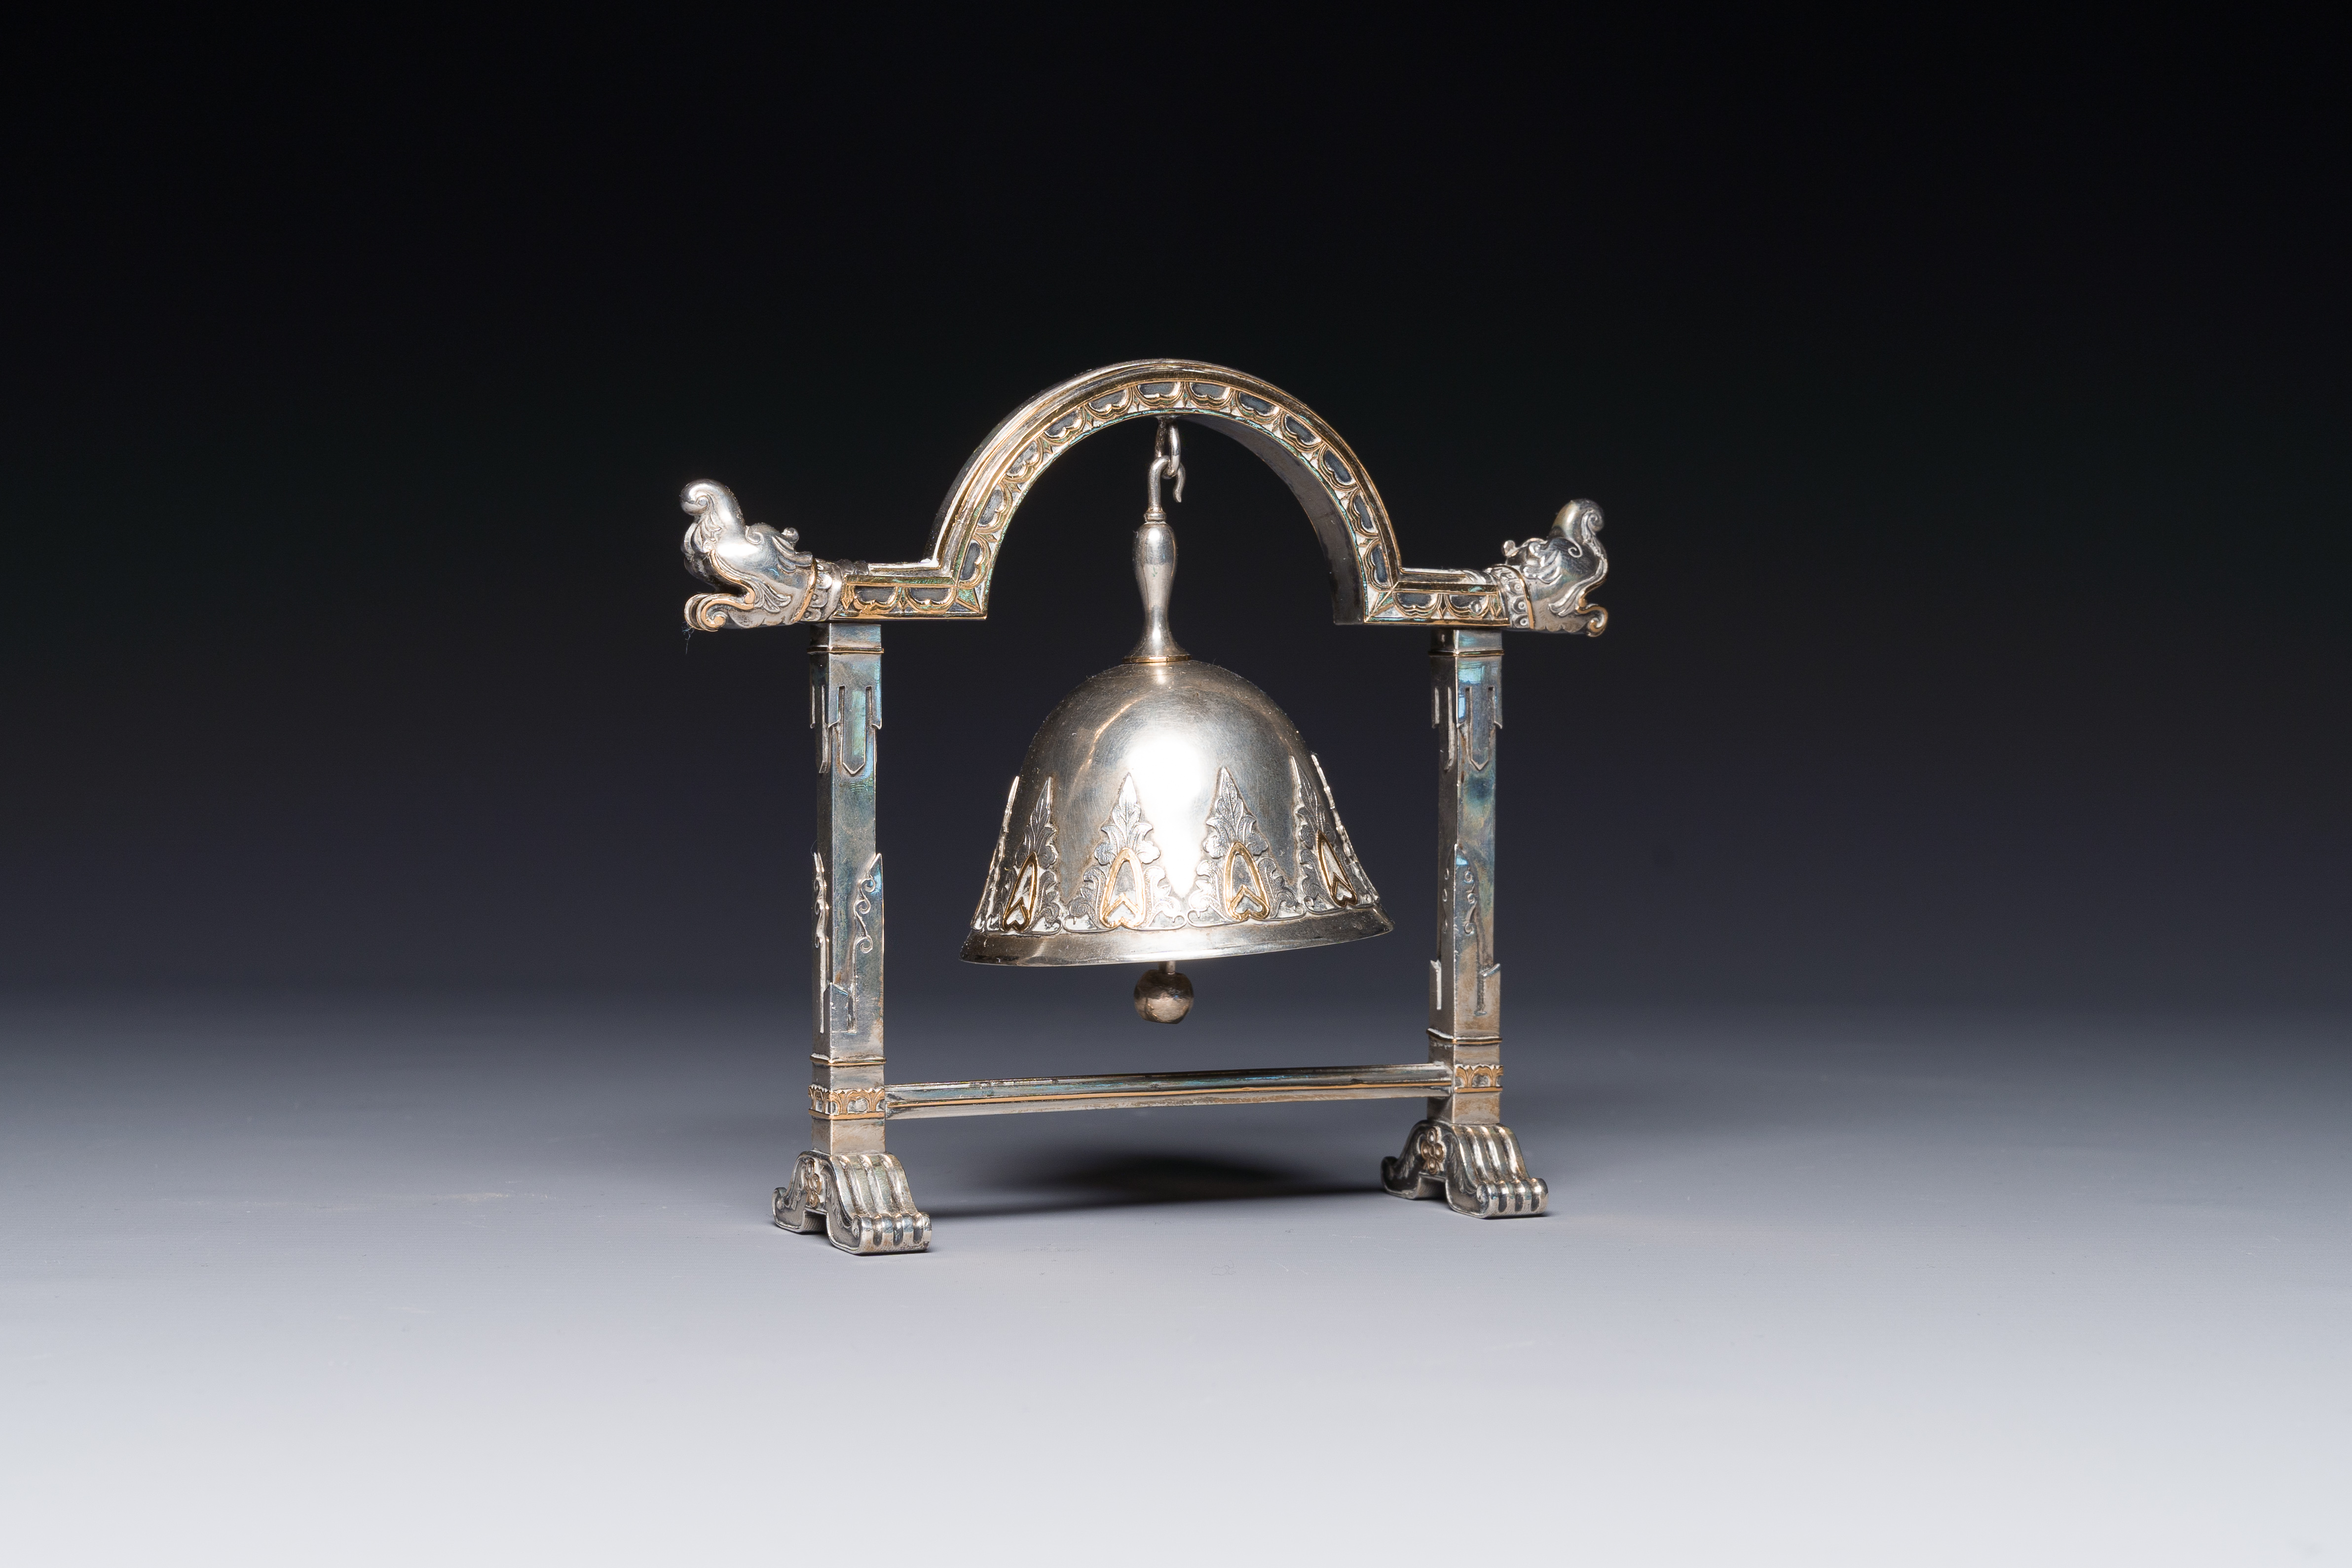 A fine parcel-gilt silver table bell or miniature gong, Southeast Asia, early 20th C. - Image 2 of 12